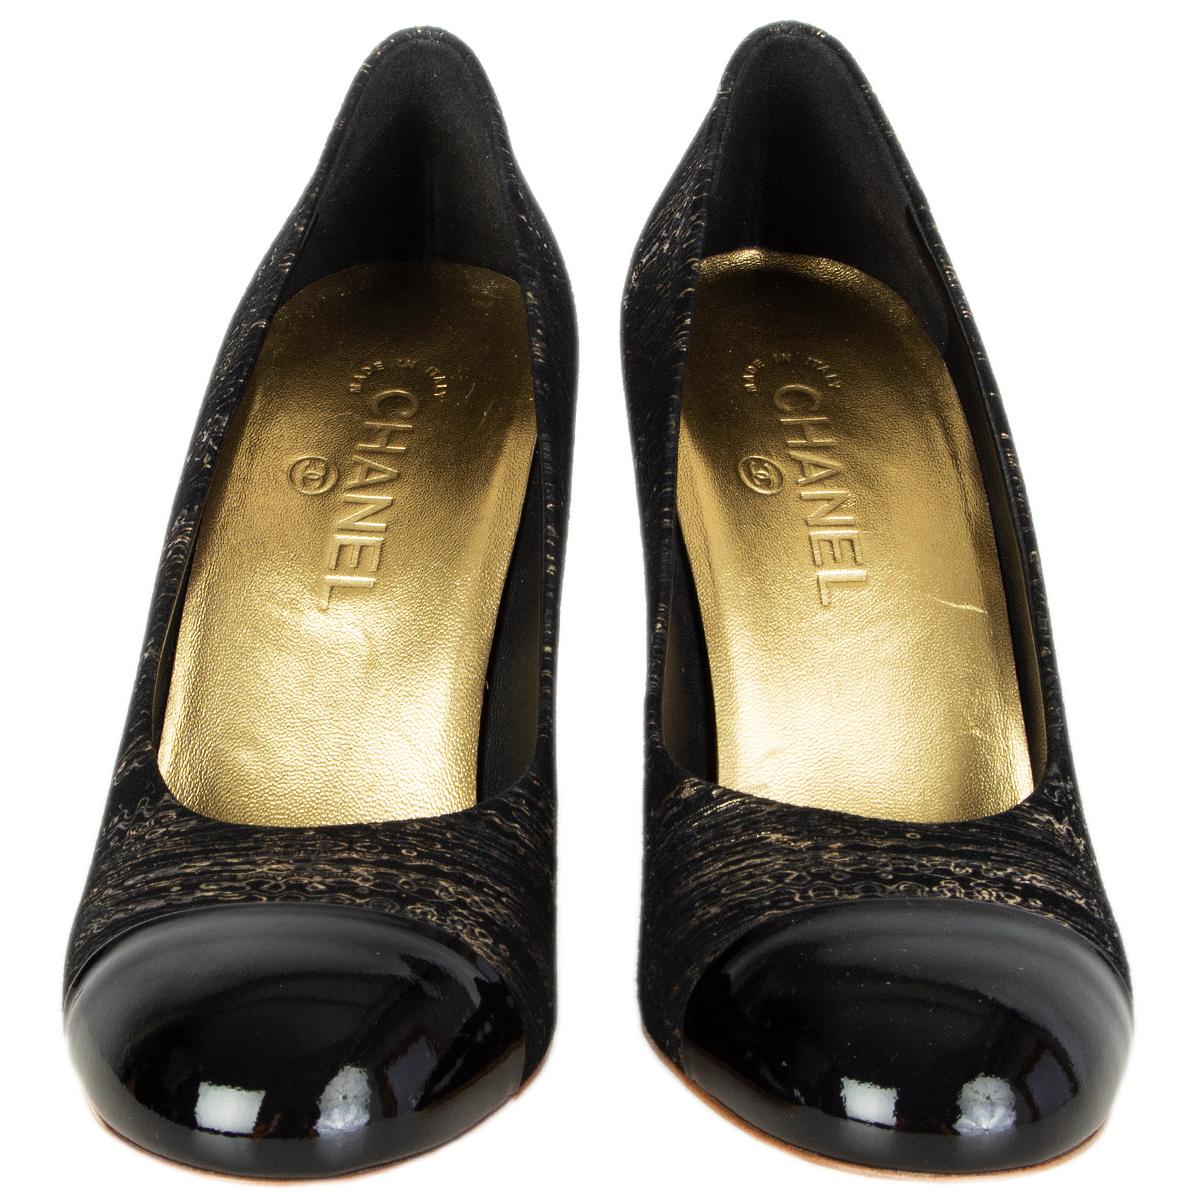 100% authentic Chanel pumps in black and gold-tone printed suede featuring black patent leather tip and faux pearl embellished heel. Brand new. 

Measurements
Imprinted Size	39
Shoe Size	39
Inside Sole	25cm (9.8in)
Width	7.5cm (2.9in)
Heel	10cm